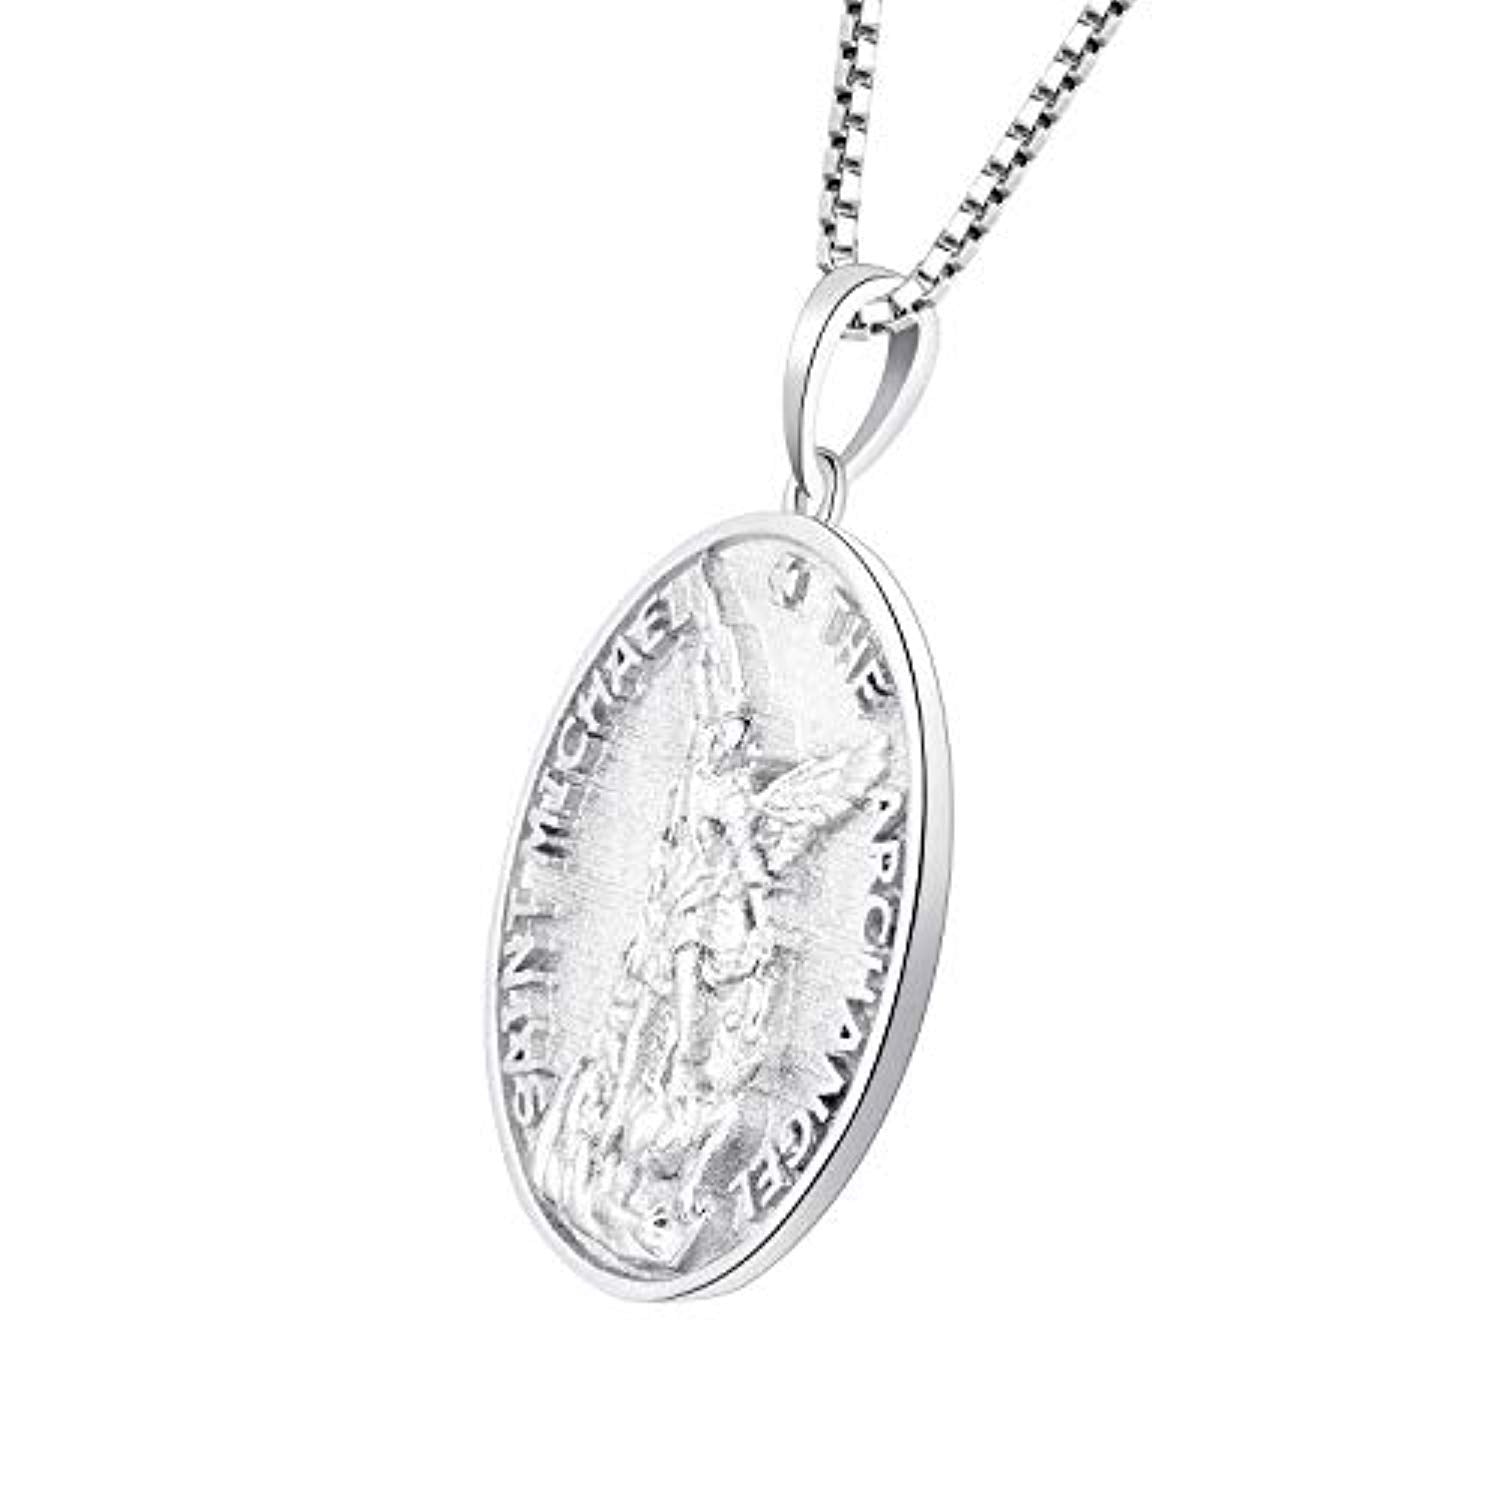 St Michael Neckalce Solid 925 Sterling Silver Pendant Religious Round Jewelry